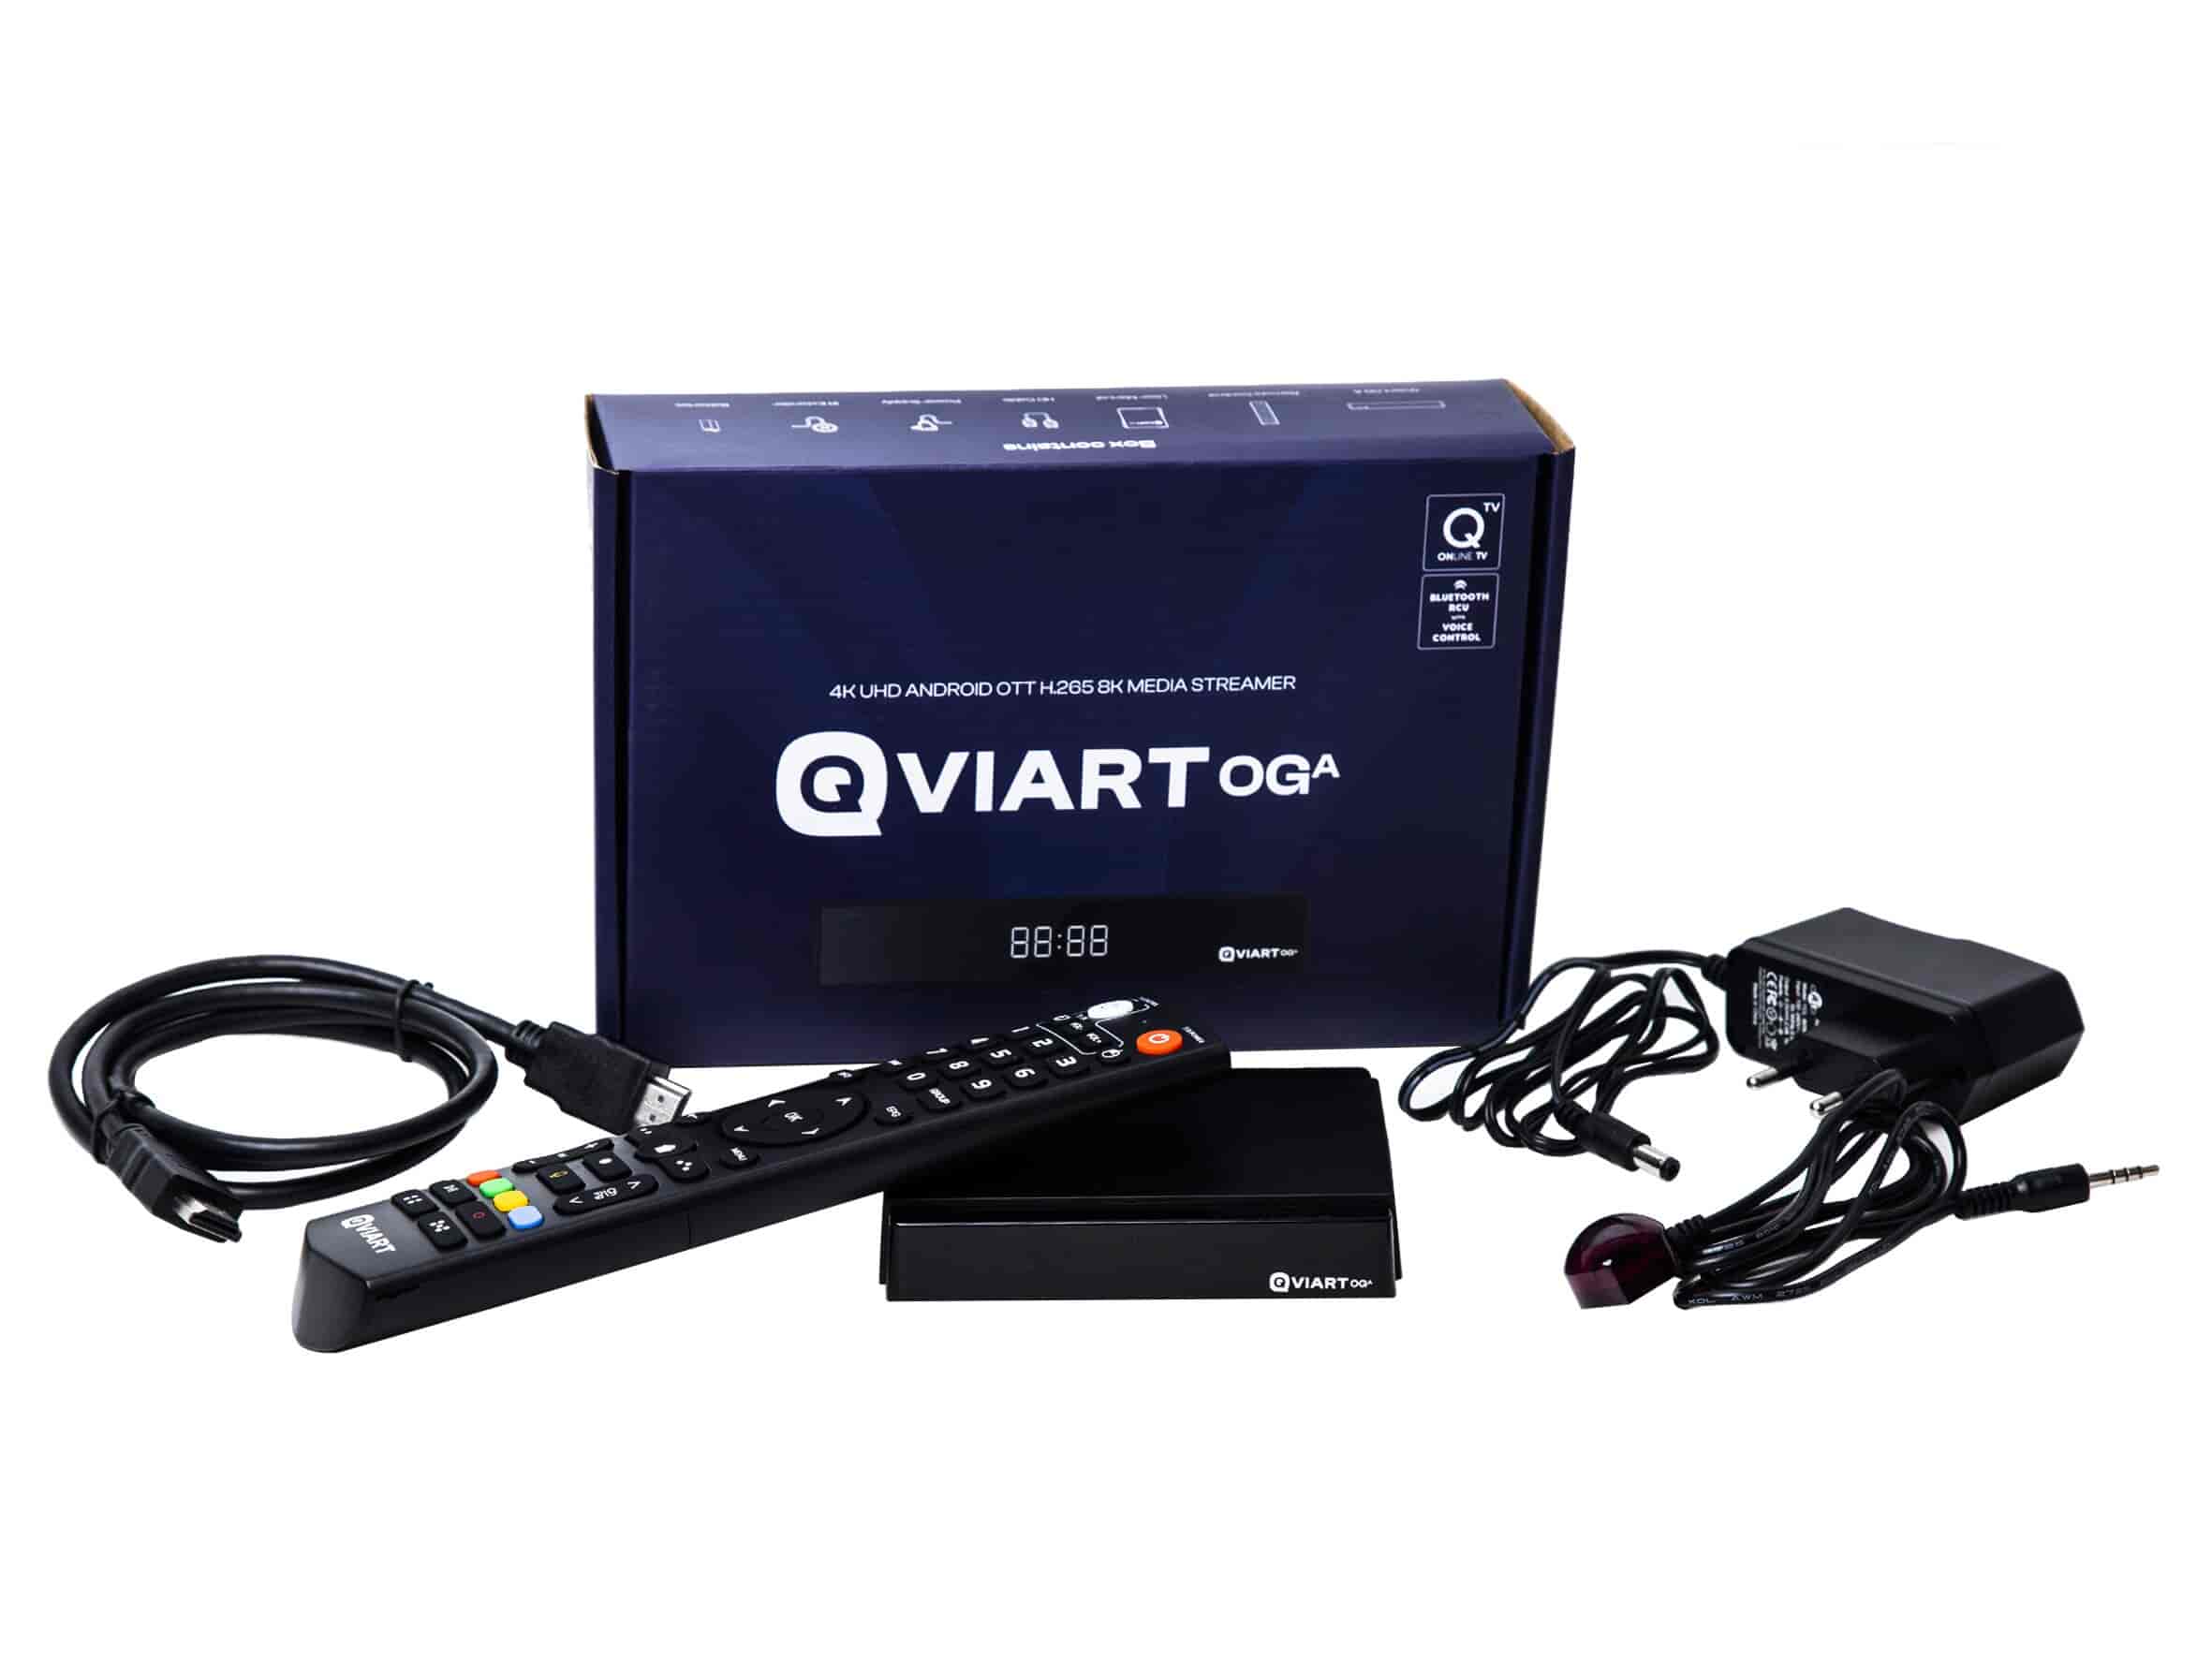 Qviart OGA - Android TV box IPTV multimediaboxQviart OGA is a new strong Android TV box that can withstand comparison with other High End IPTV boxes - but at an absolutely fair price. Here you get voice-controlled remote control, Dual band WiFi, 4K/8K, USB 3.0, Bluetooth 5.1 and much more. 2GB DDR4 and 16GB Flash provide plenty of options for installing your favorite apps. Everything is operated via a nice remote control with good response and voice control. Qviart OGA is both fast and easy to operate, with the power to handle even the most demanding services. Comes preloaded with the well-known QTV app, which makes it easy to connect to any IPTV service. Experience TV in a better way.QVIART LUNIX